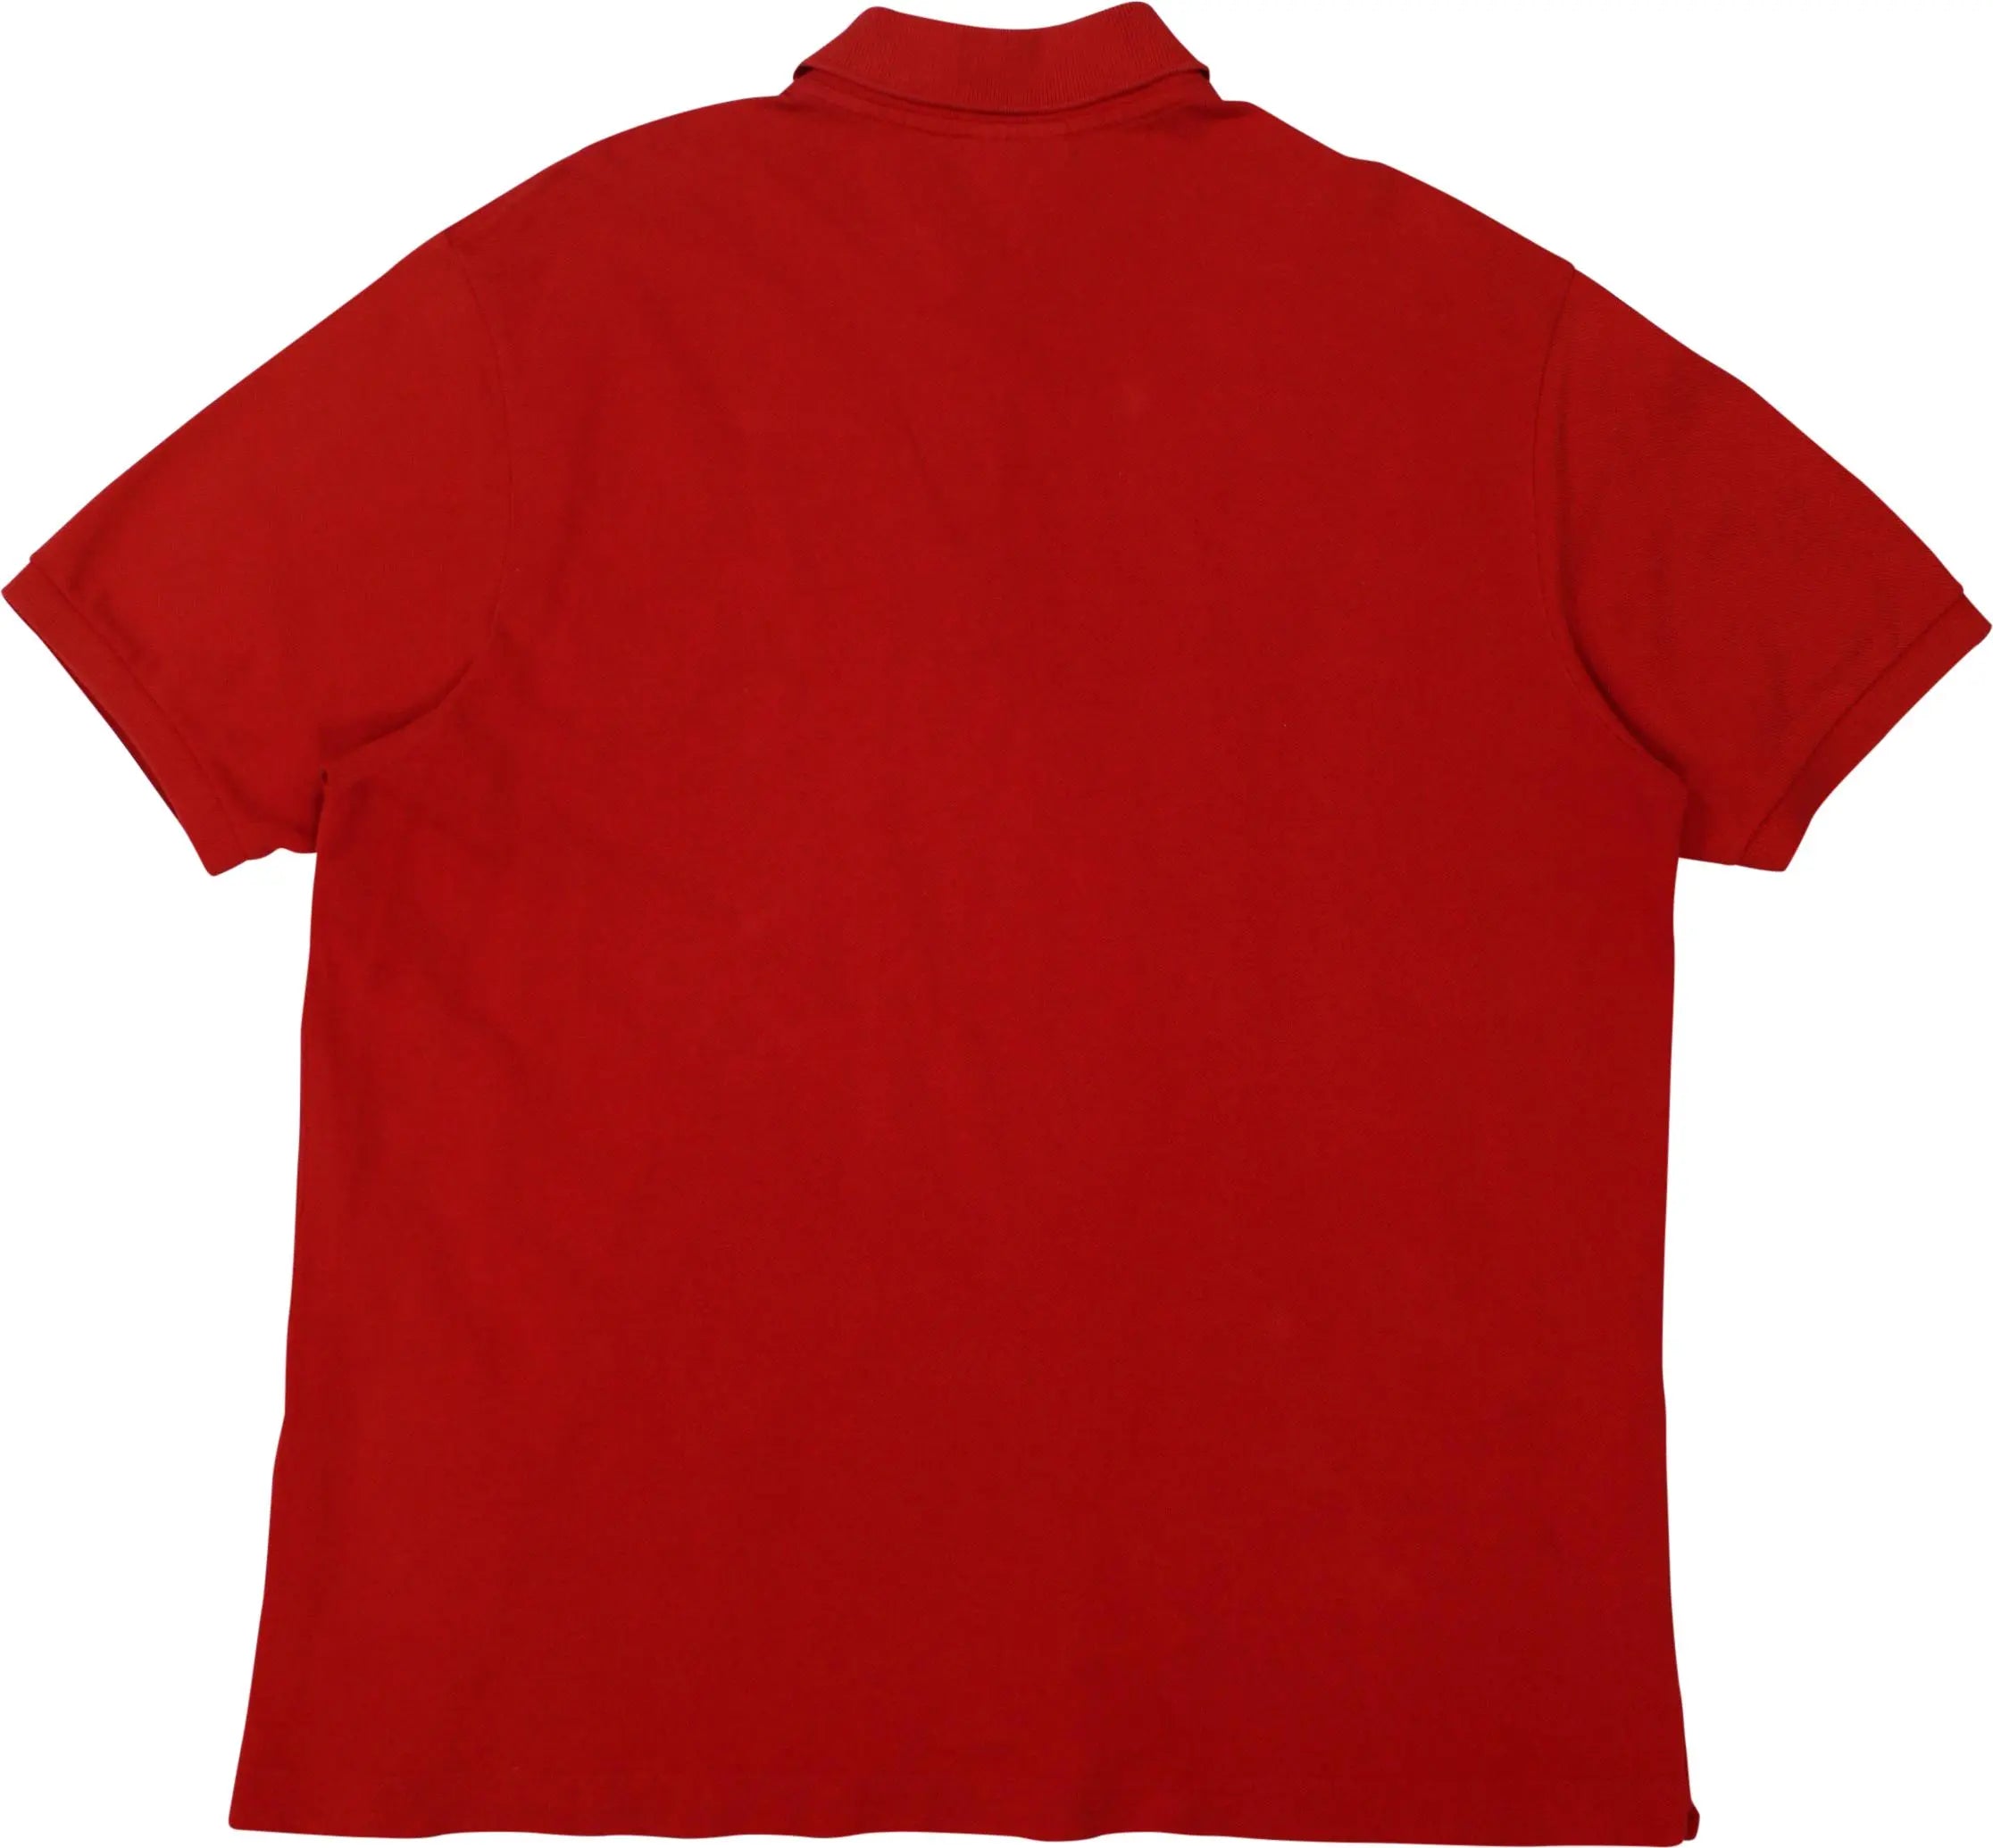 Lacoste - Red Polo Shirt by Lacoste- ThriftTale.com - Vintage and second handclothing